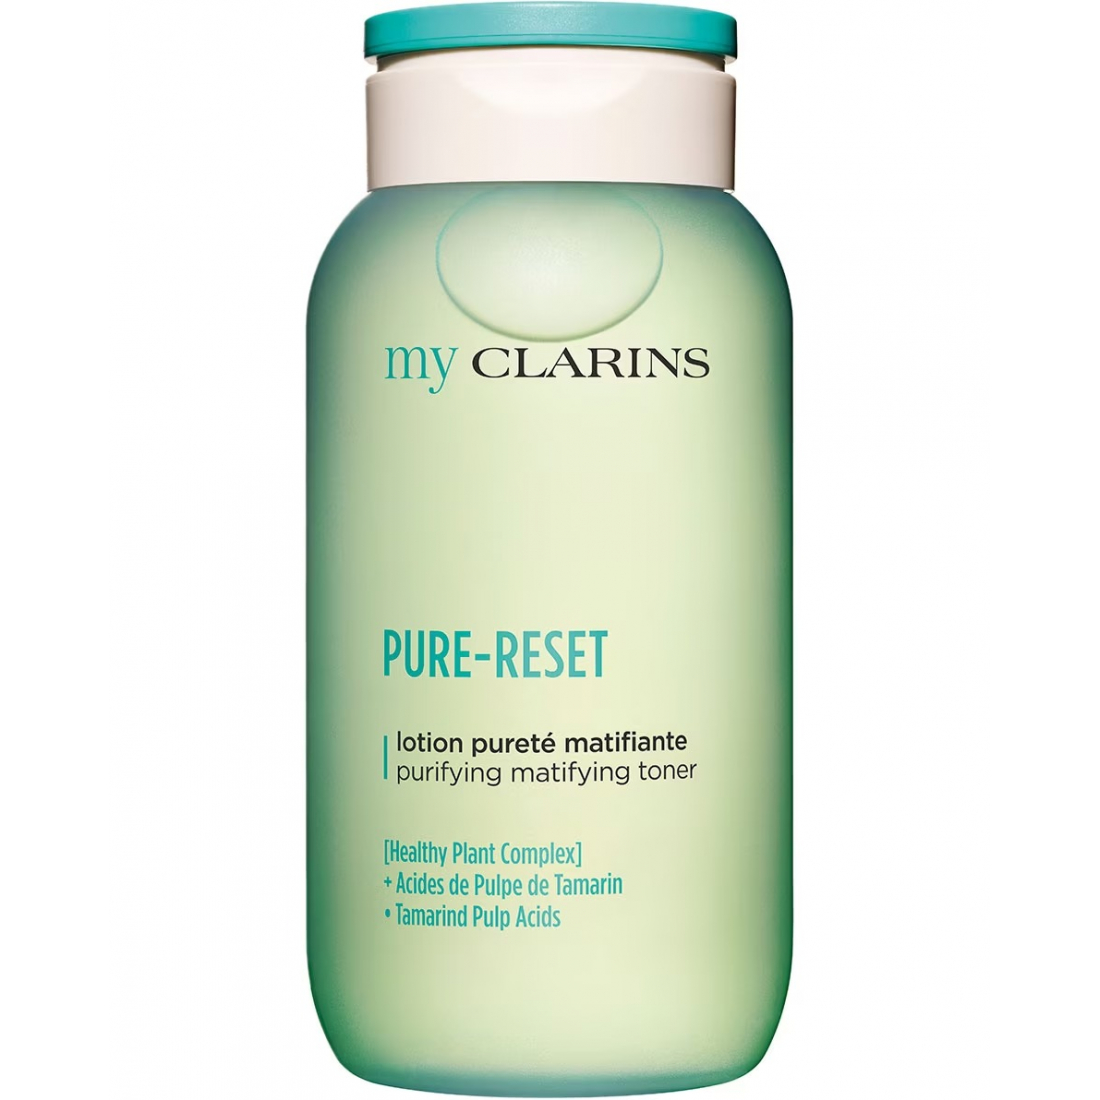 'MyClarins Clear-Out Matifying' Purifying Toner - 200 ml